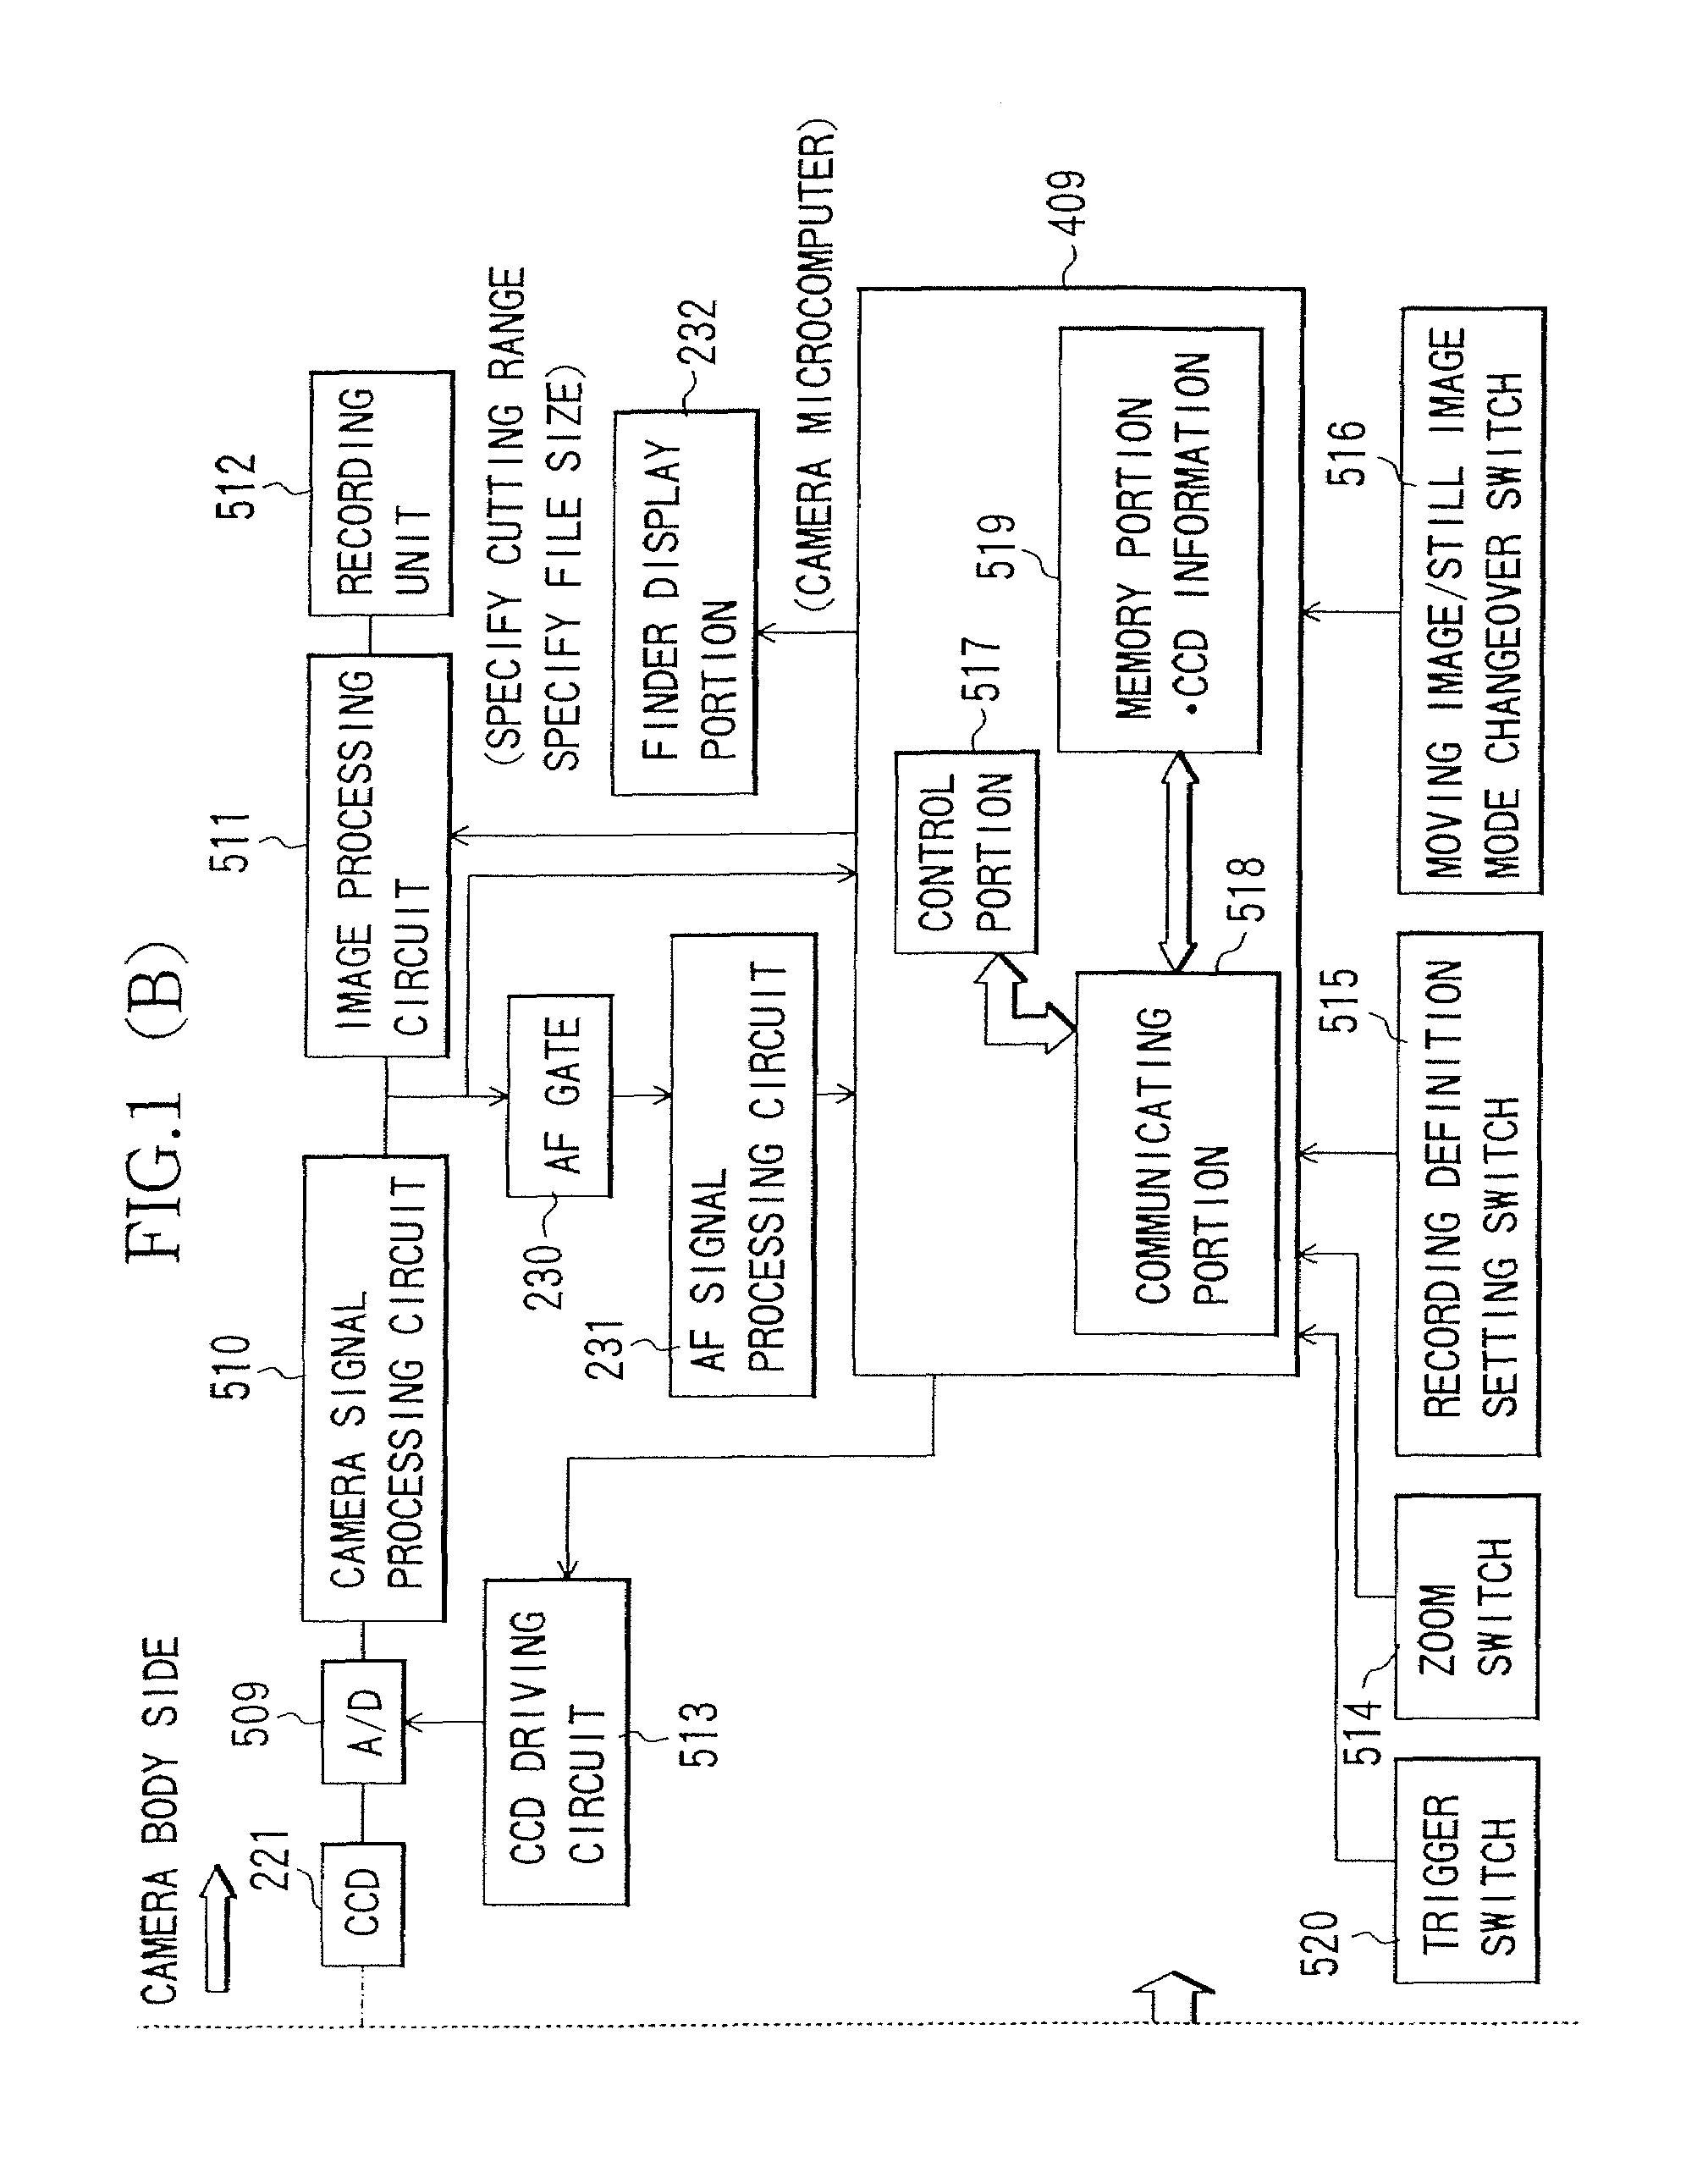 Imaging apparatus with interchangeable lens apparatus, the lens apparatus having a memory for storing optical performance data of the lens apparatus